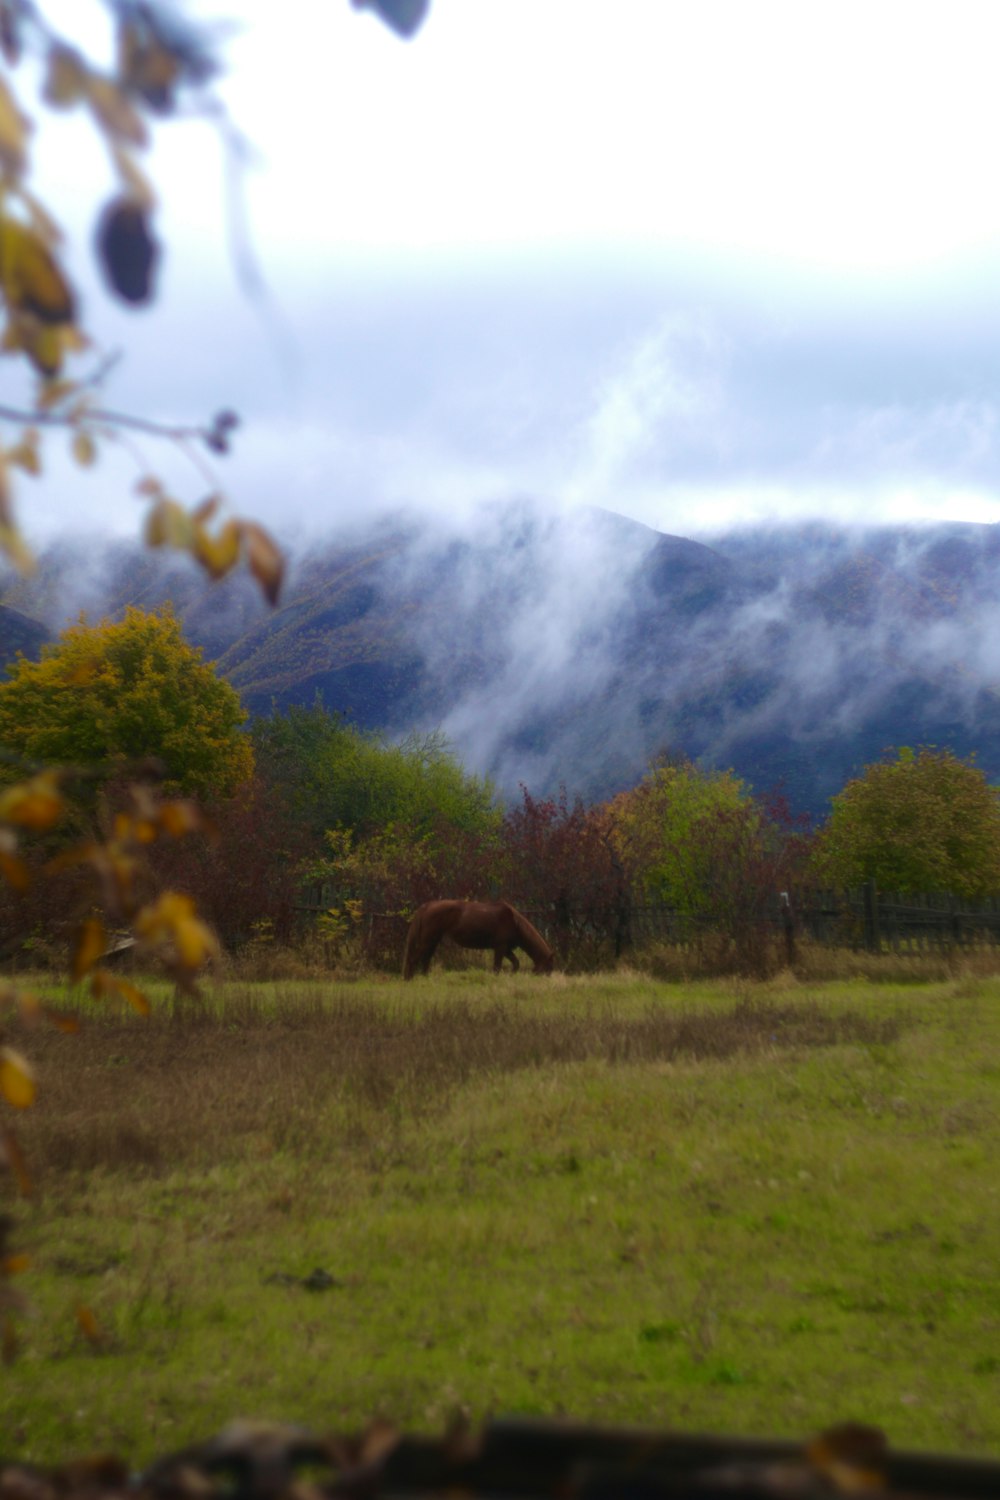 a horse grazing in a field with mountains in the background